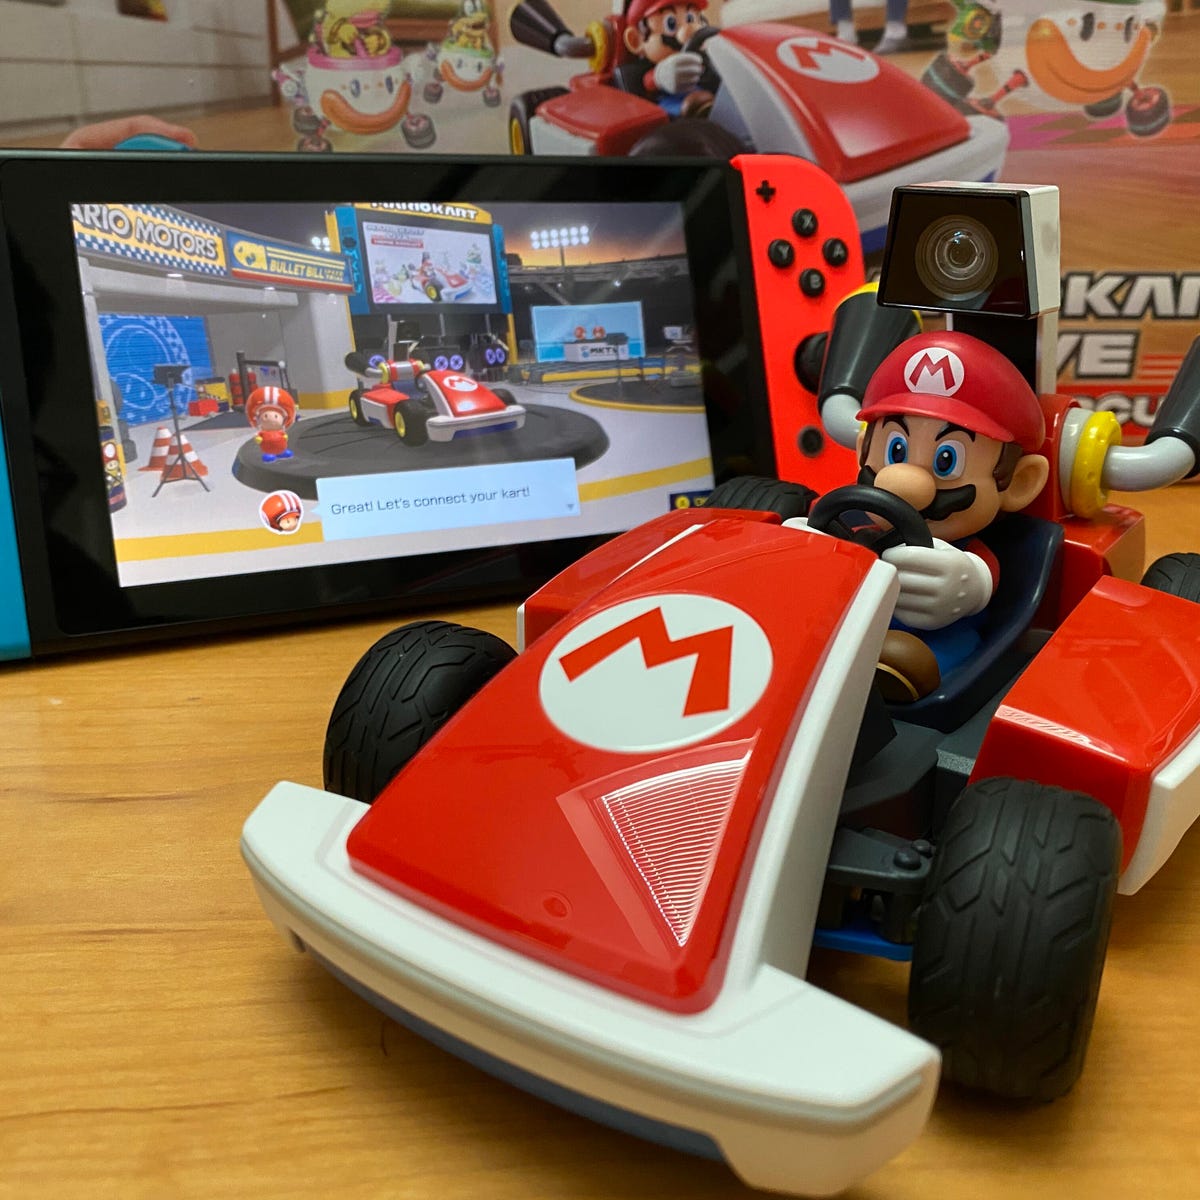 Mario Kart Live Home Circuit hands-on: I've turned my house into a